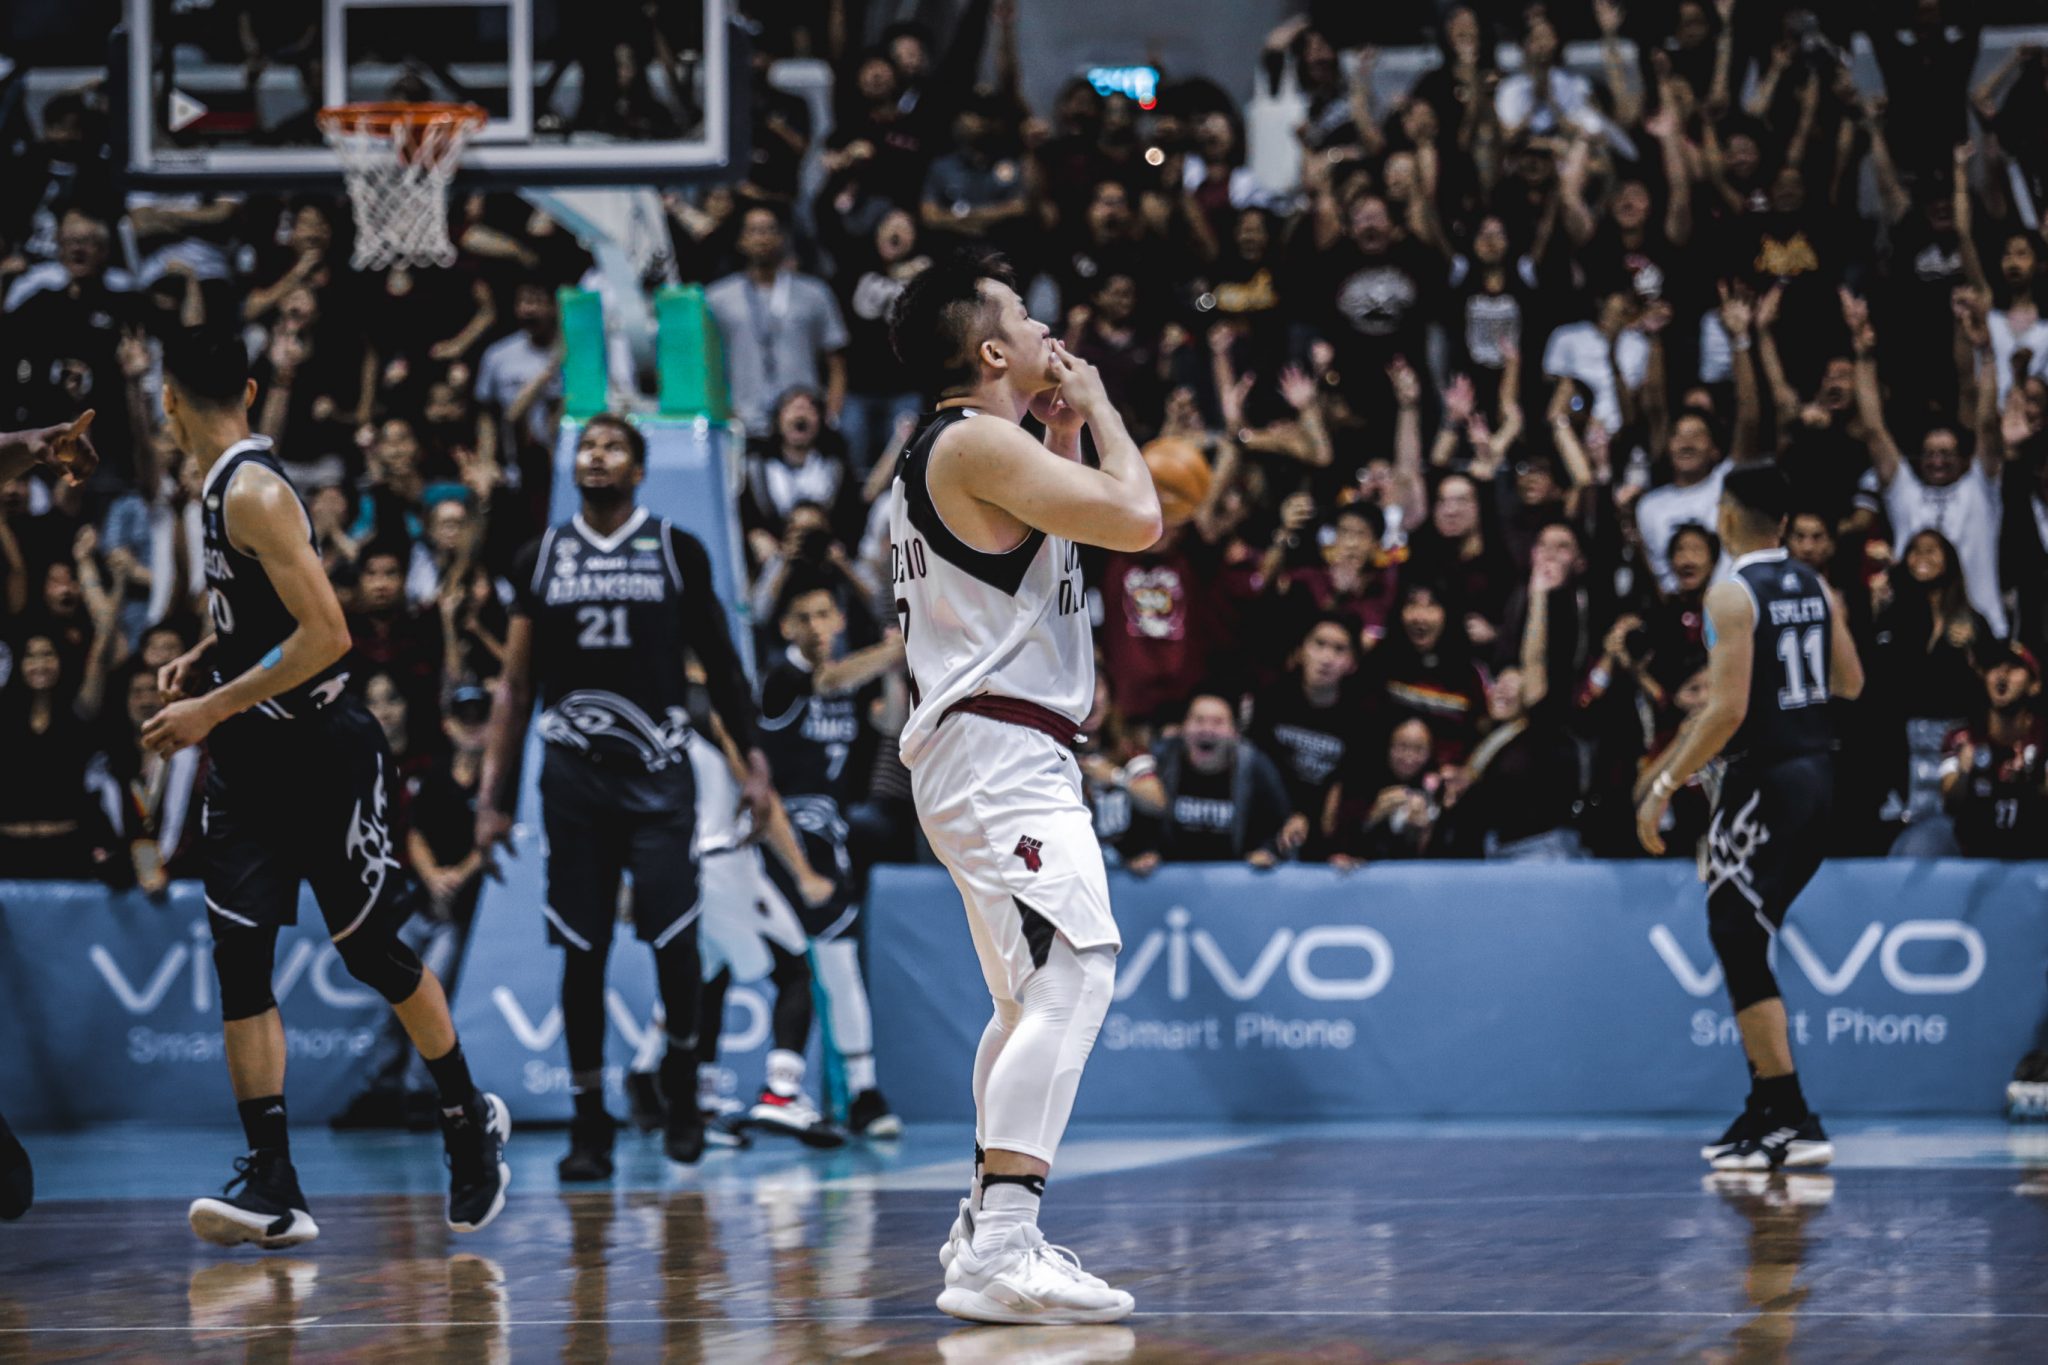 The UP Fighting Maroons reached their first final in 32 years after beating the Adamson Soaring Falcons